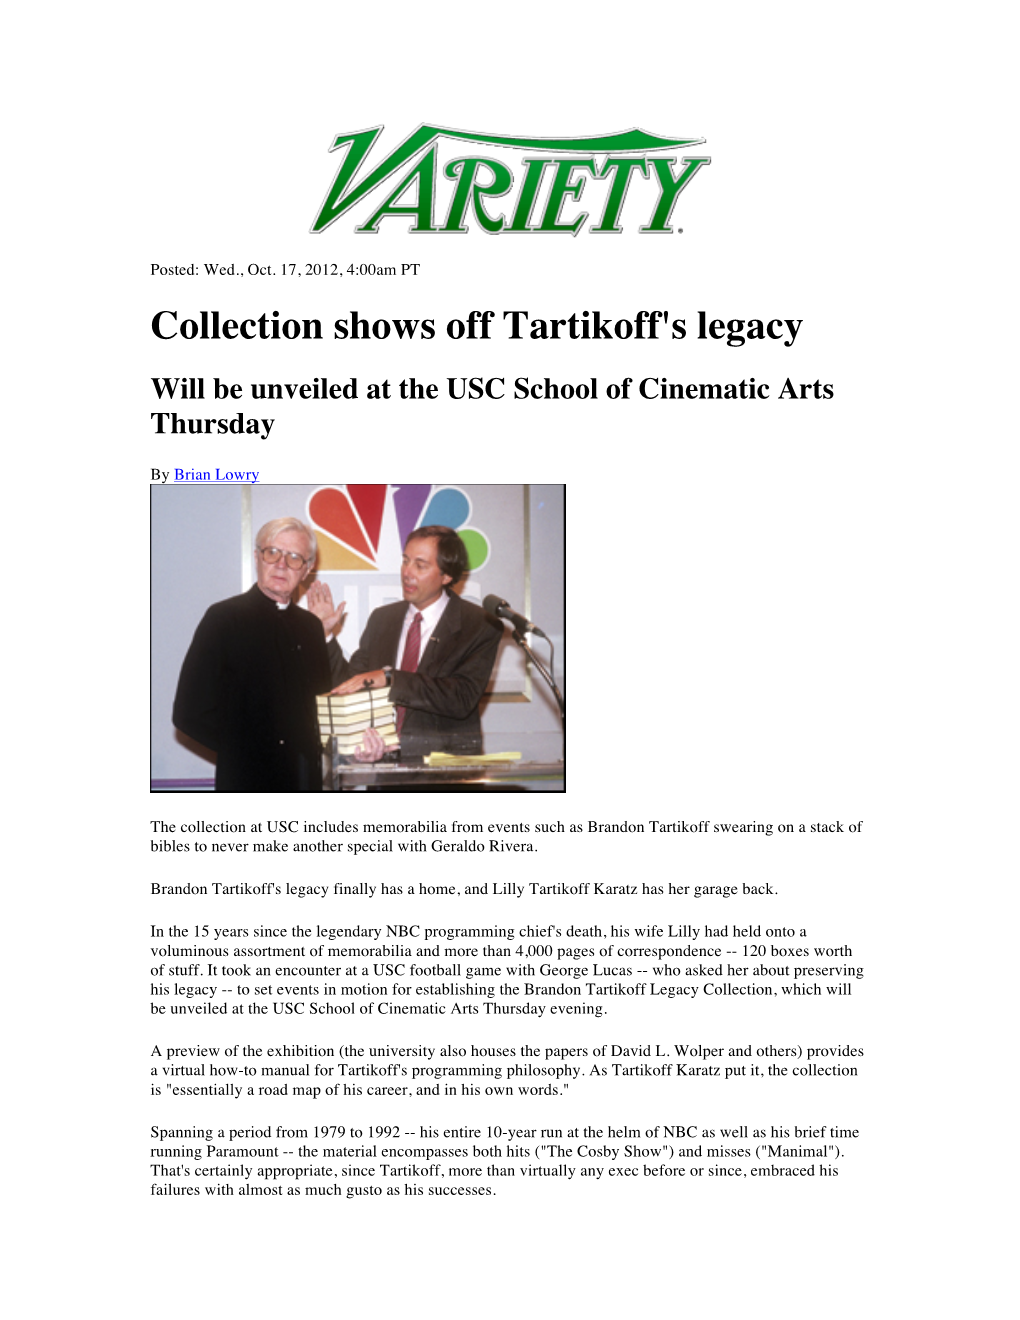 Collection Shows Off Tartikoff's Legacy Will Be Unveiled at the USC School of Cinematic Arts Thursday